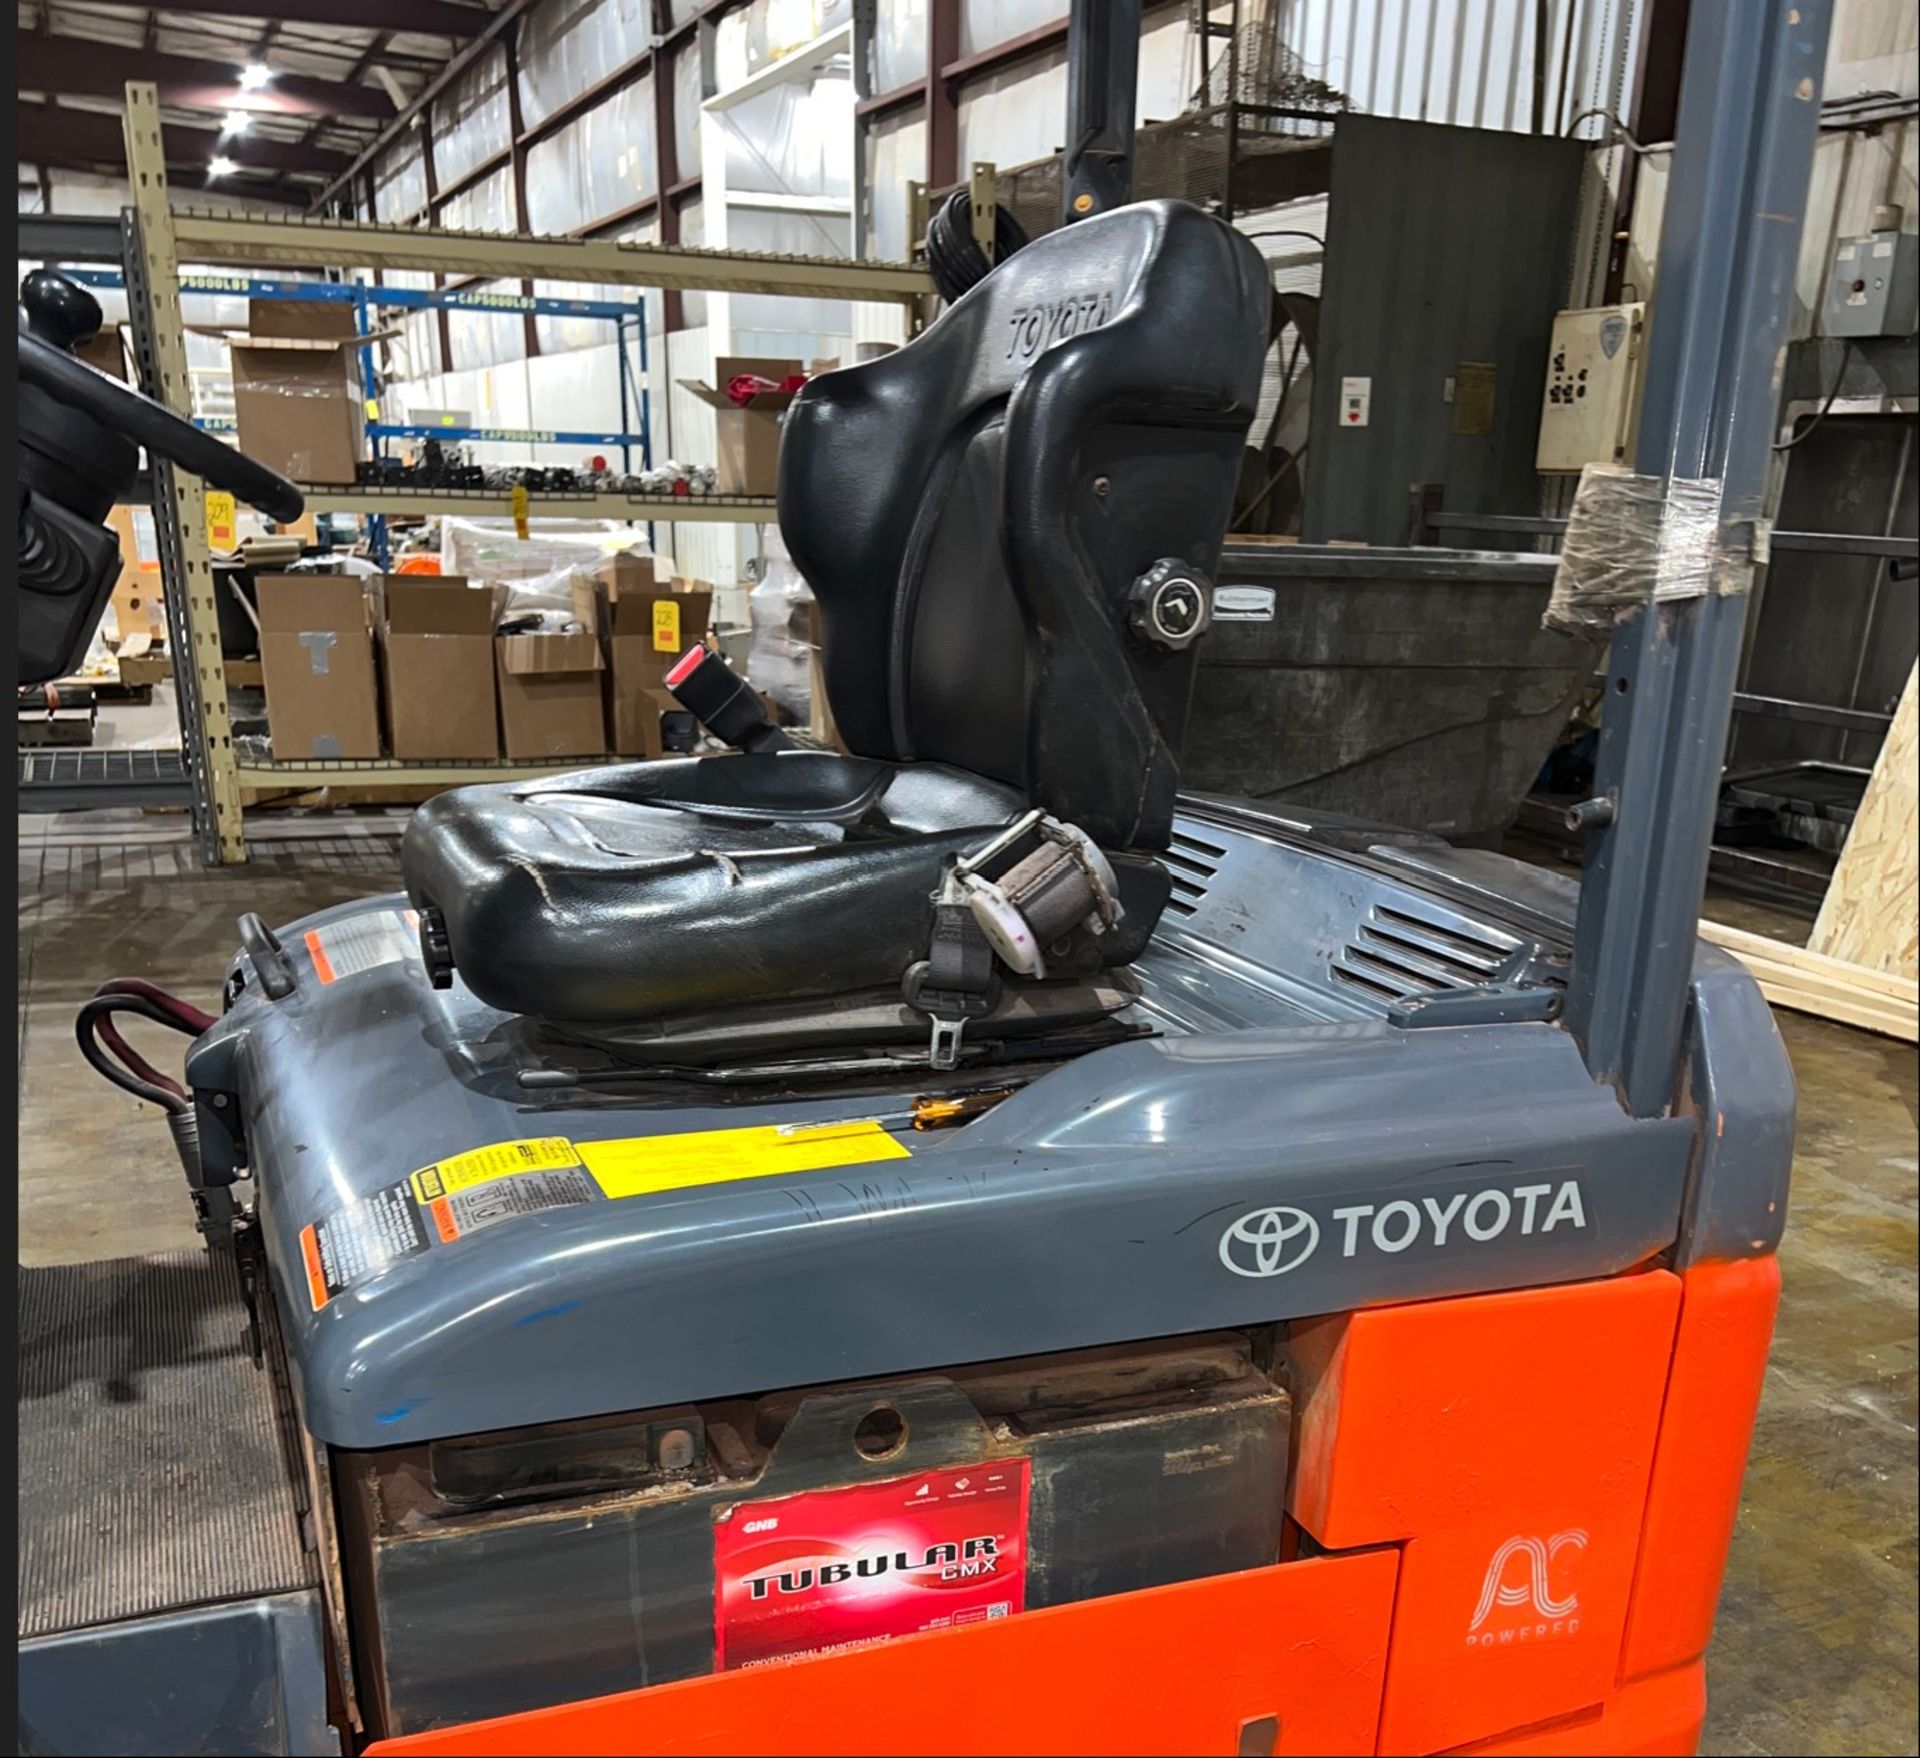 Toyota Electric Side Shift Forklift Truck with Adjustable Forks (Subject to Seller's Confirmation) - Image 11 of 13